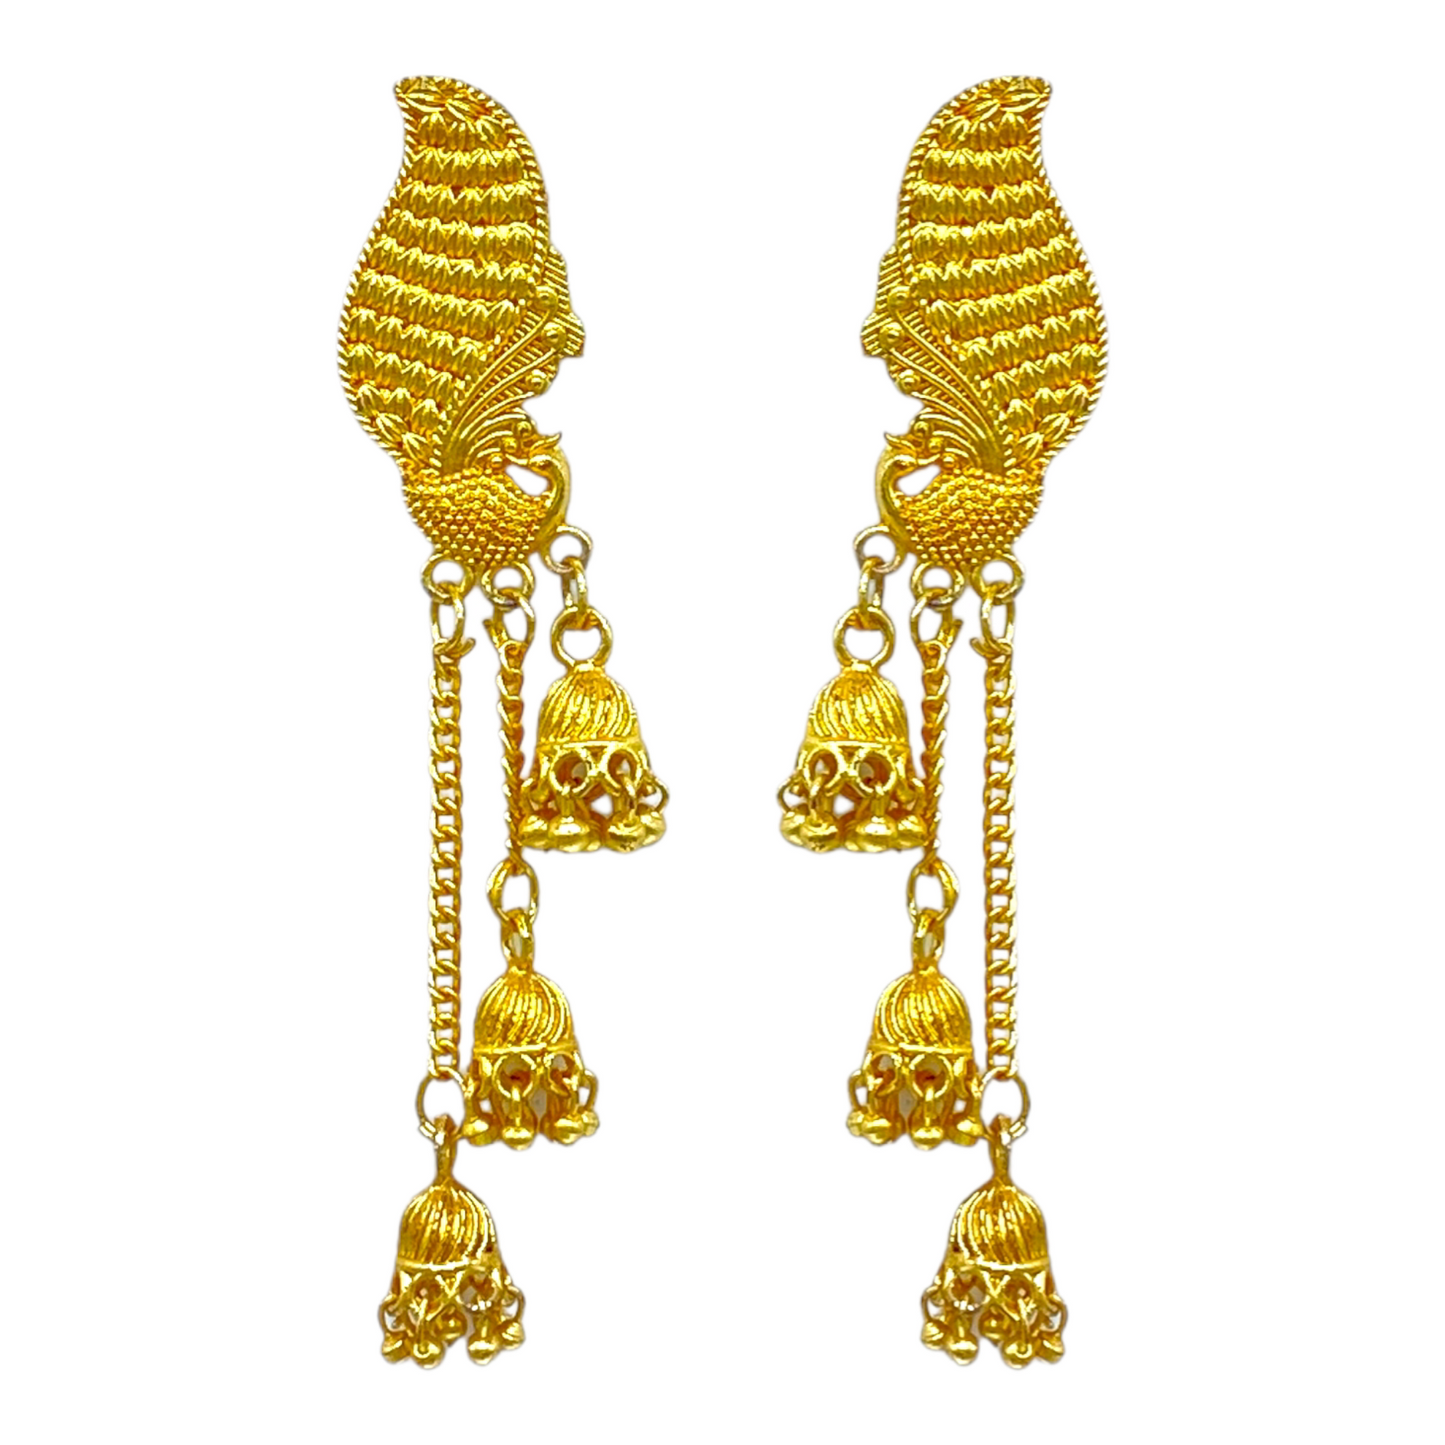 Elegant Peacock Studded Gold Earrings with Dangling layerd chain